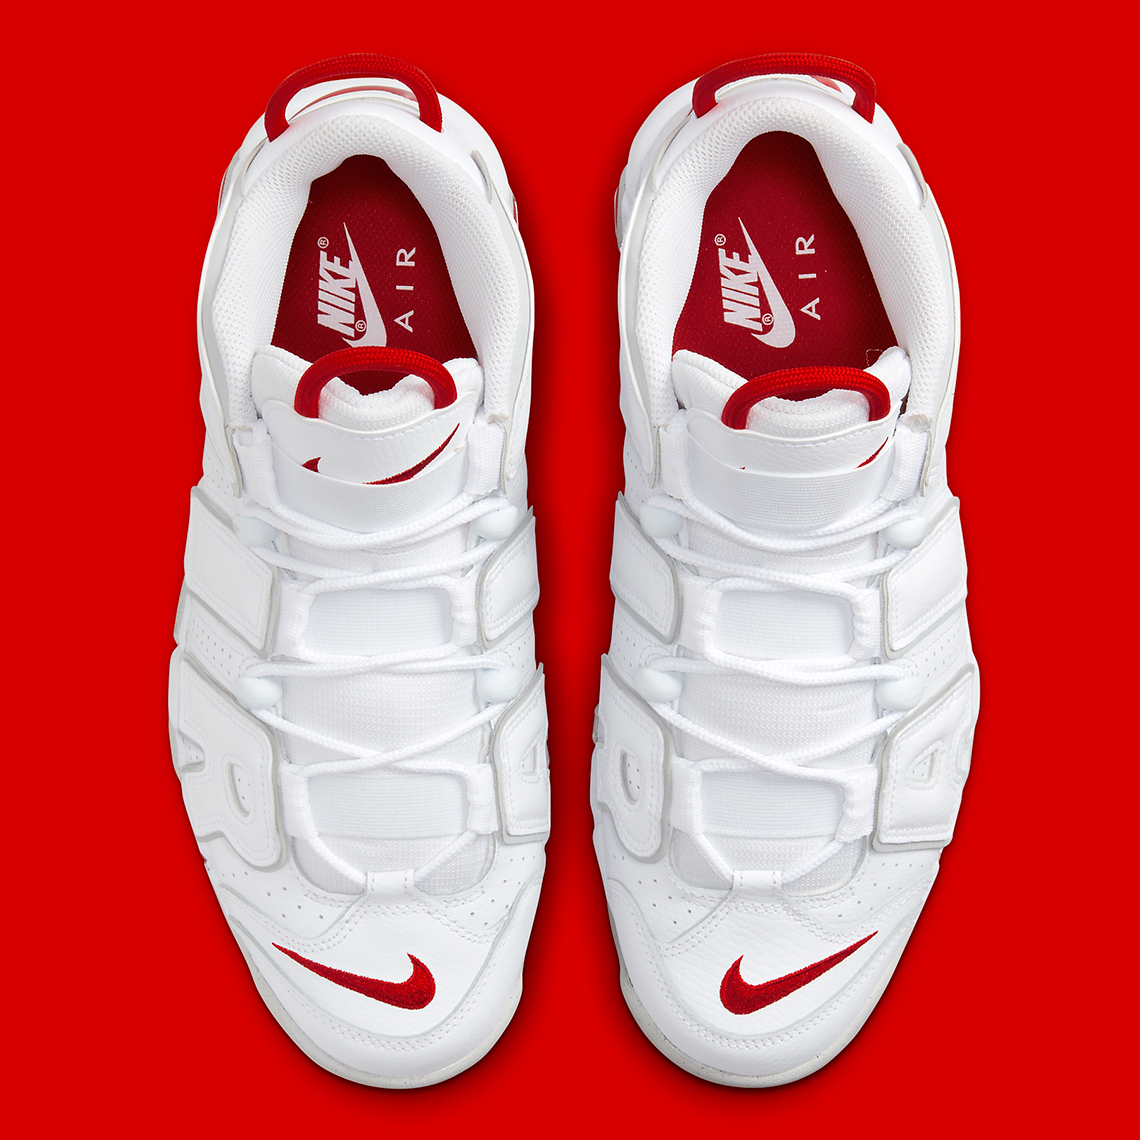 nike air more uptempo white red grey DX8965 100 5